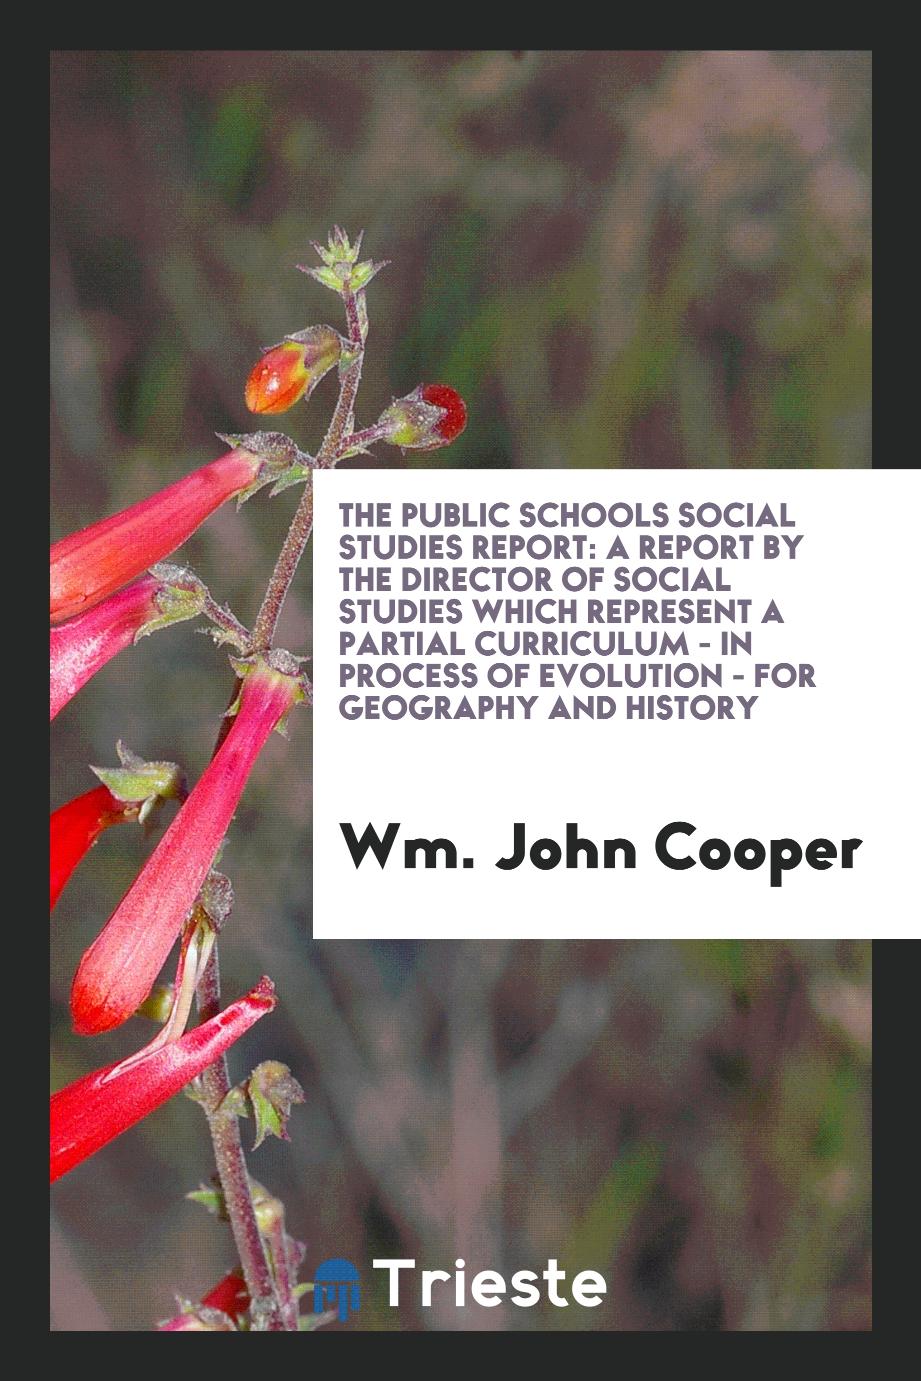 The Public Schools Social Studies Report: A Report by the Director of Social Studies Which Represent a Partial Curriculum - in Process of Evolution - for Geography and History